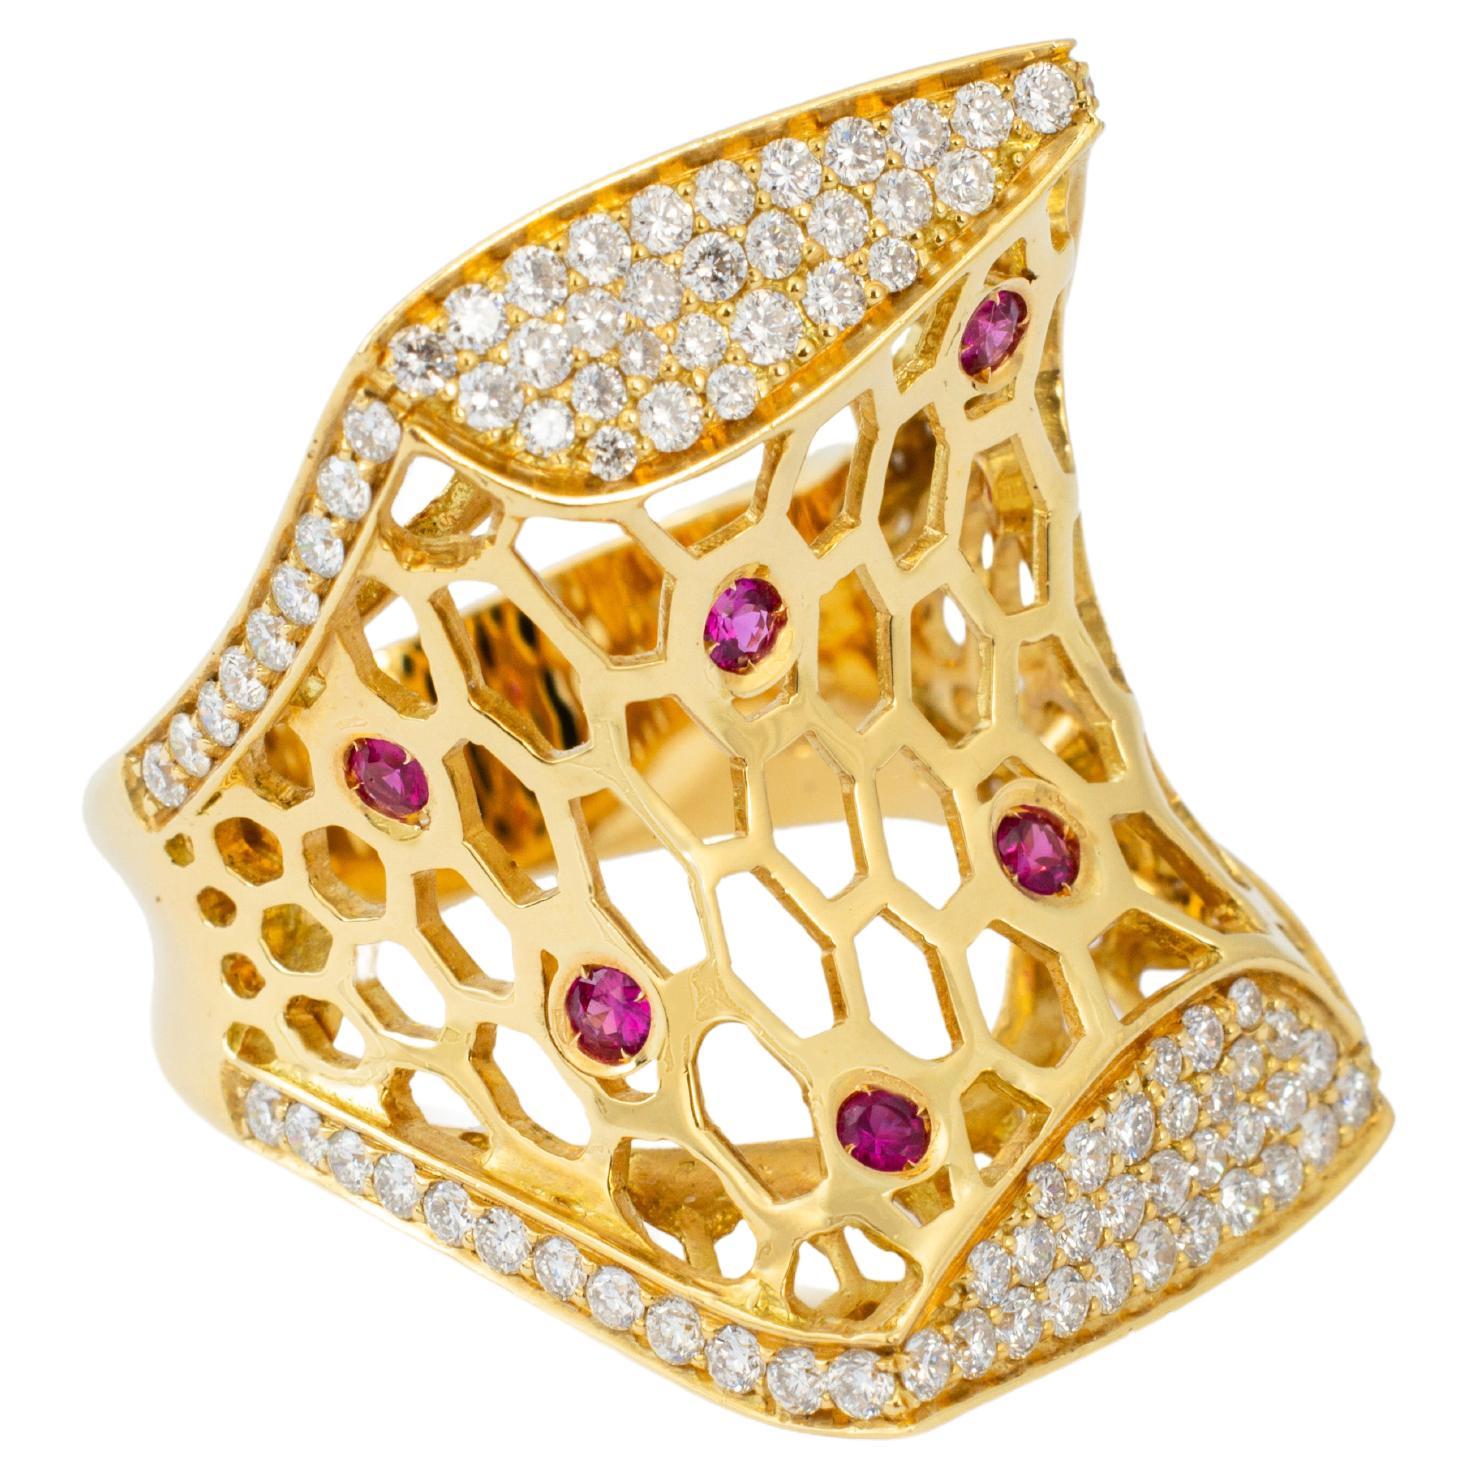 "Costis" Precious Beehive Collection Uneven Ring - Diamonds and Burma Rubies For Sale